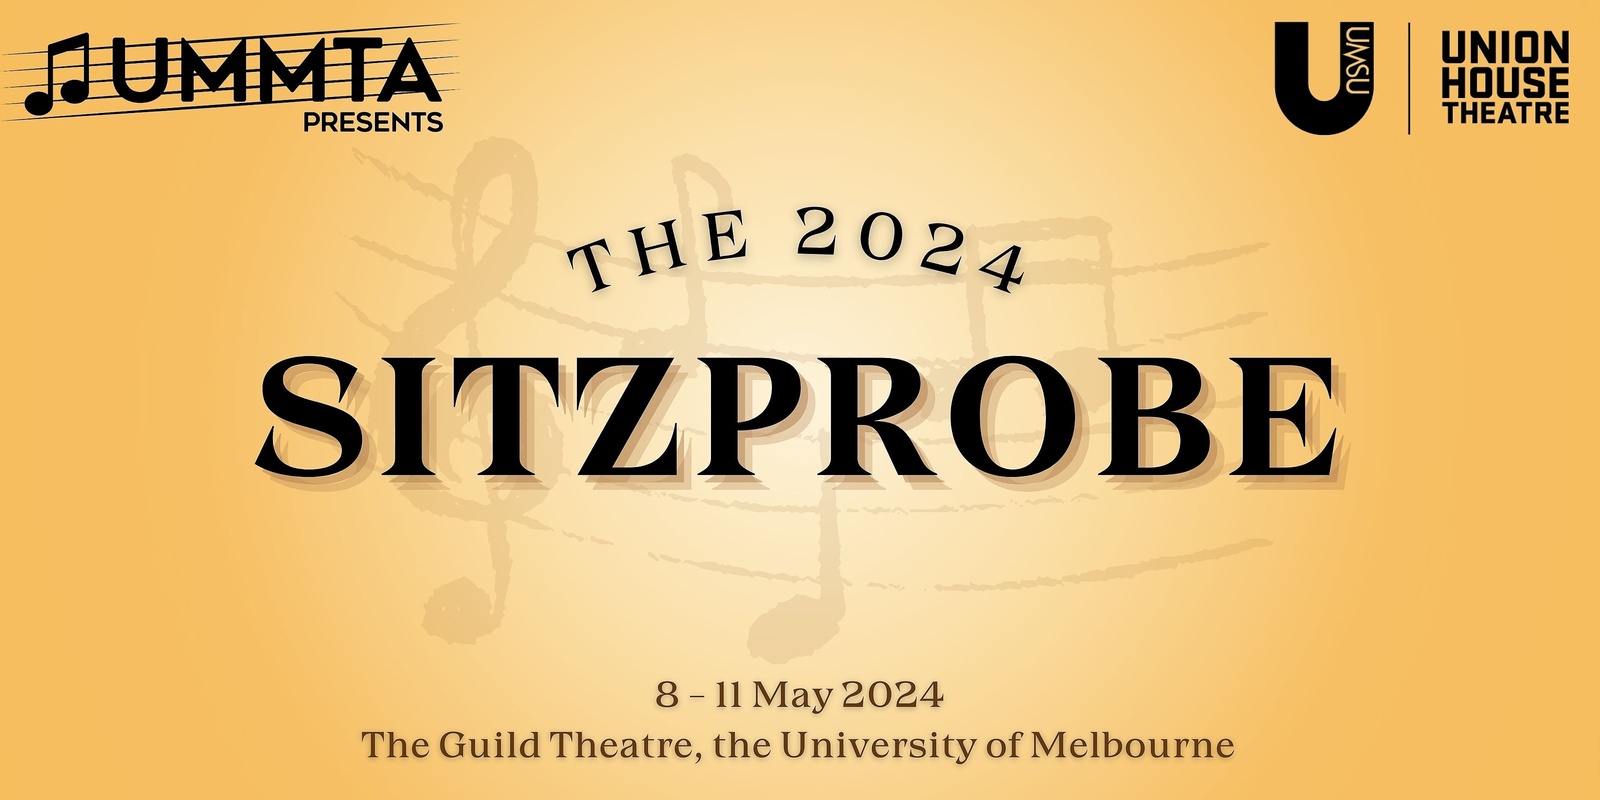 Banner image for The 2024 Sitzprobe